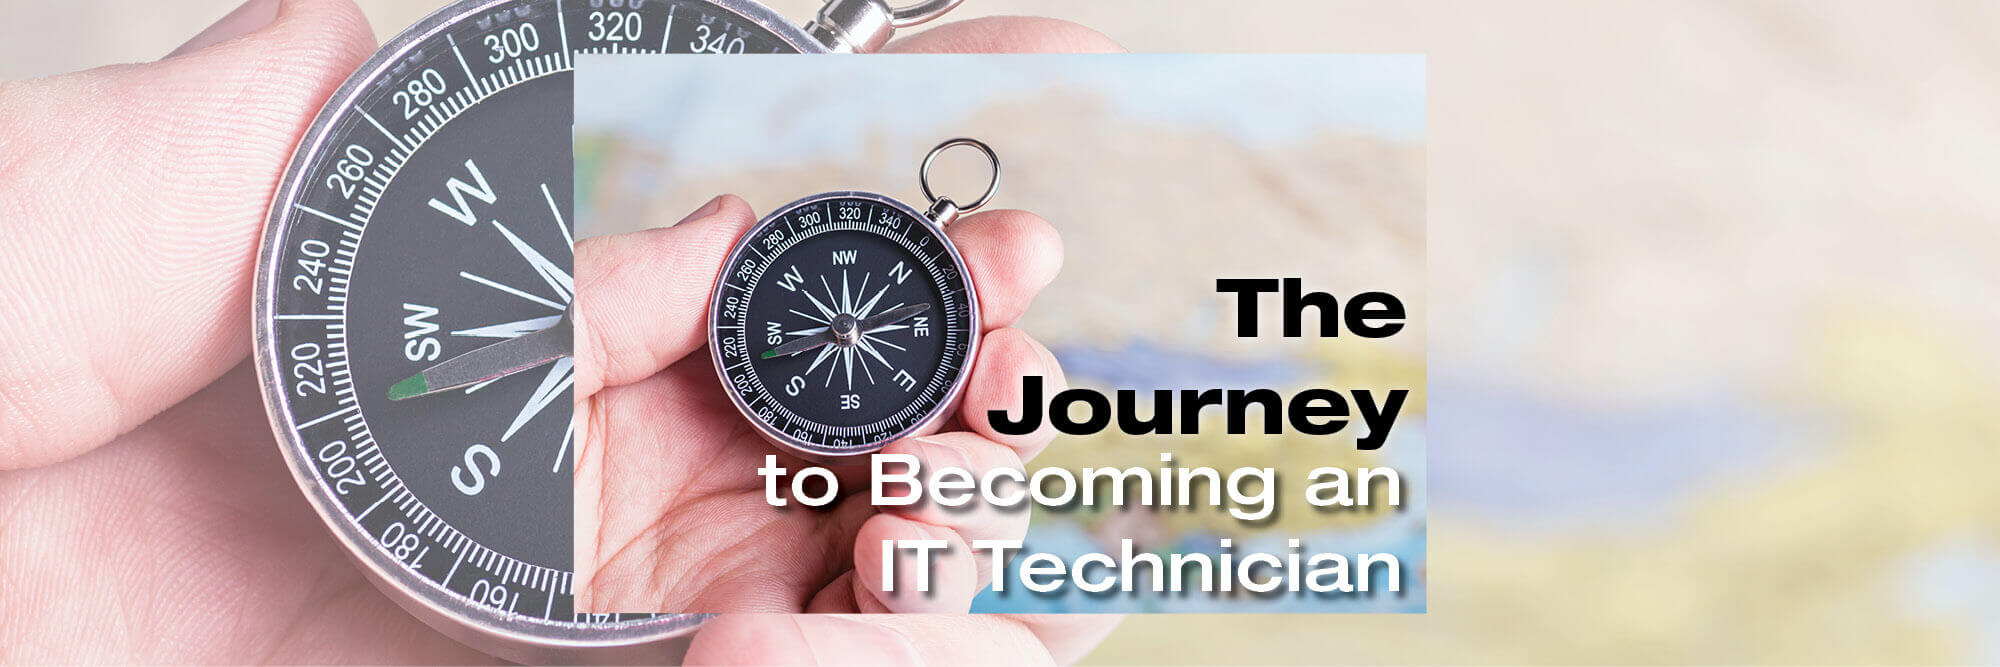 The Journey to Becoming an IT Technician